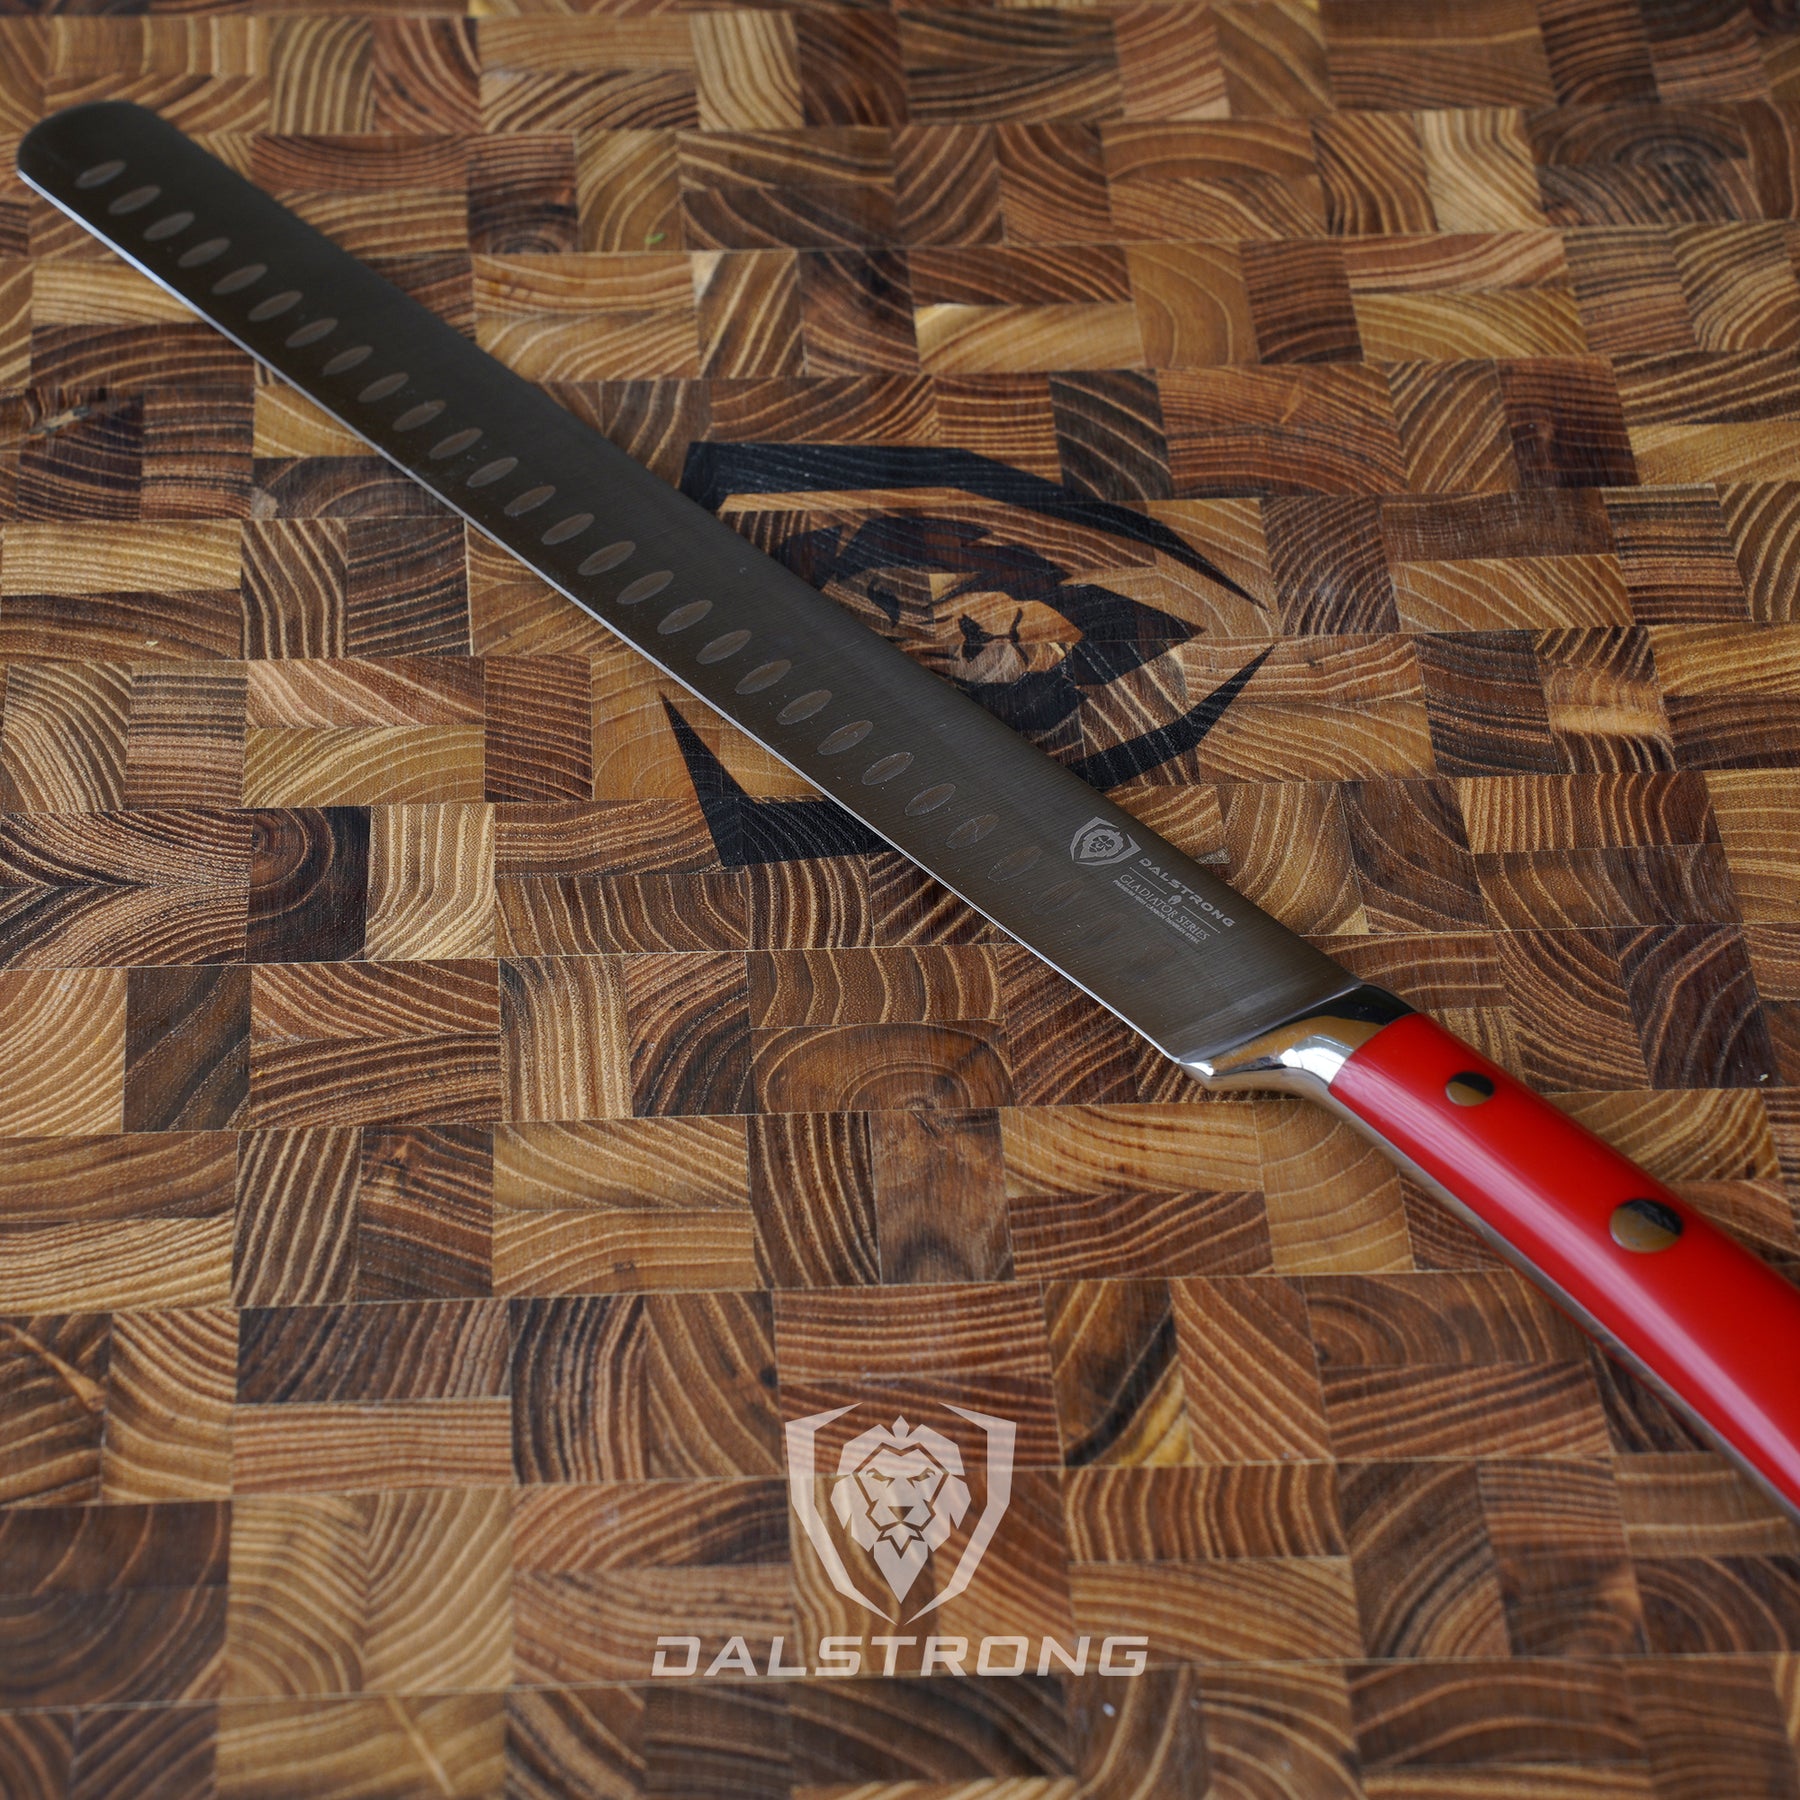 Dalstrong Paring Knife - 3.5 inch - Gladiator Series - Forged High-Carbon German Steel - Crimson Red ABS Handle Kitchen Knife - Sheath Included 